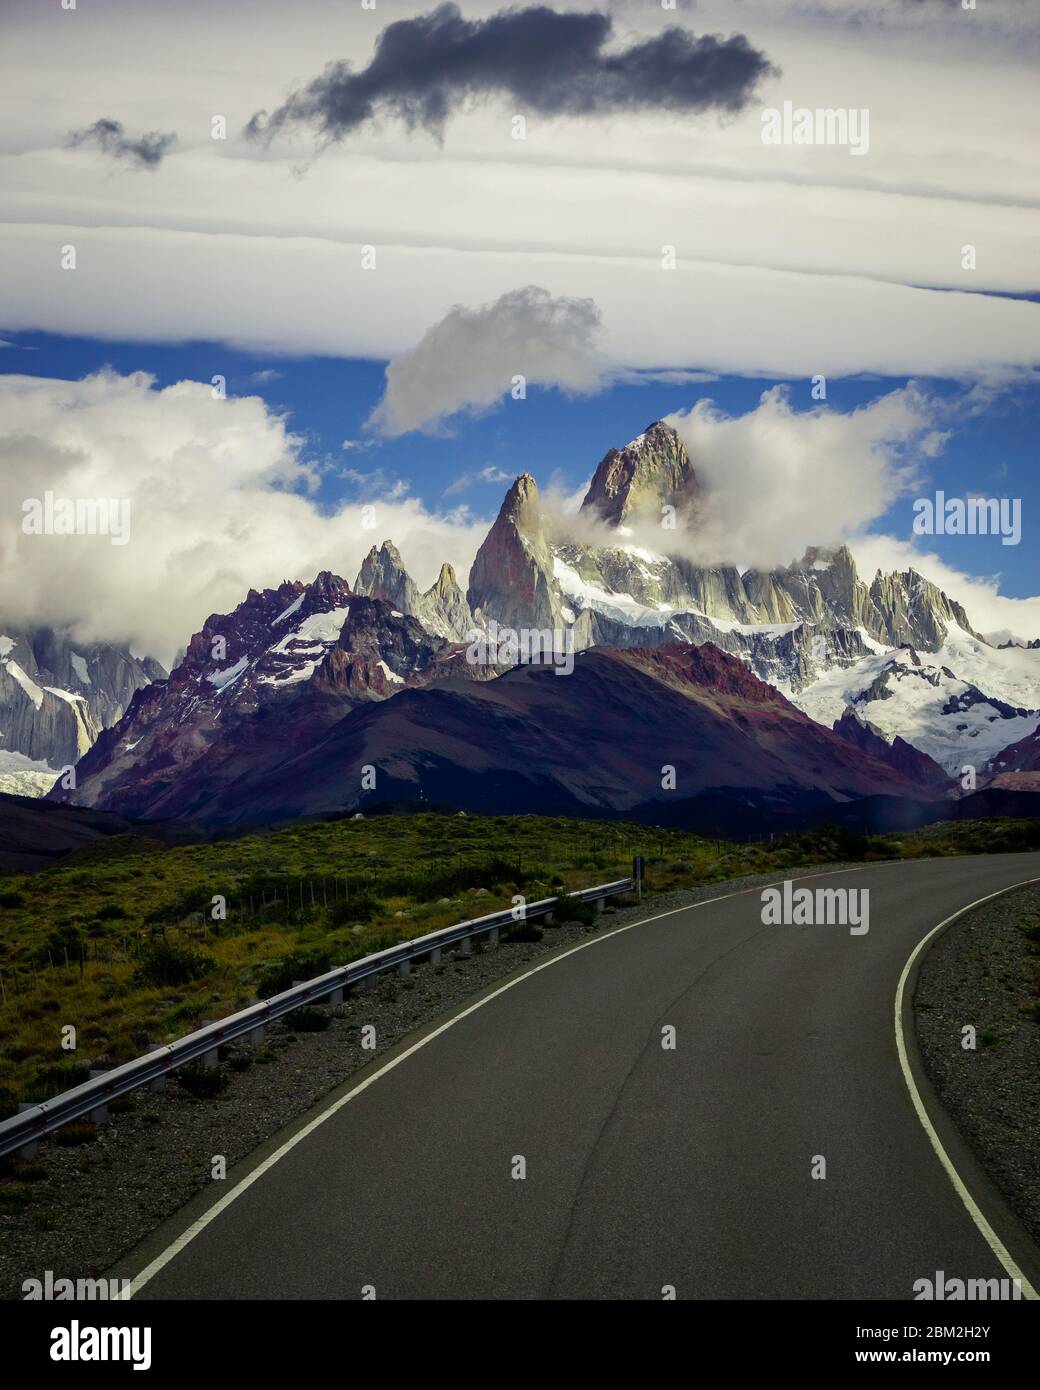 fitz roy patagonia Mountain Argentine Banque D'Images